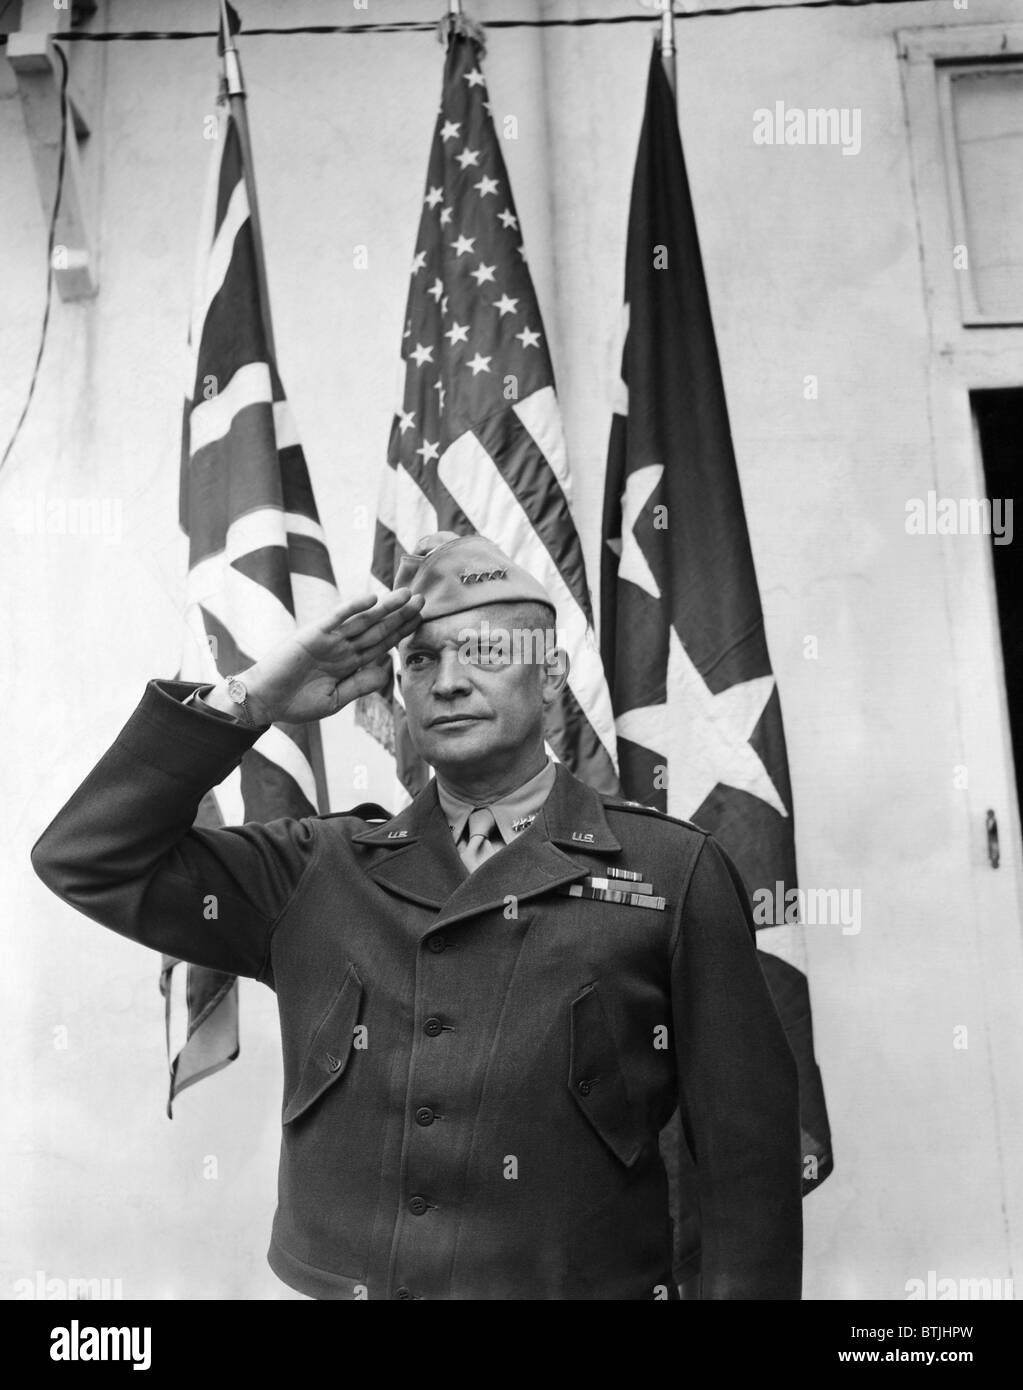 General Dwight D. Eisenhower saltuing the British, American, and the General's Flags, May 8, 1943. Courtesy: CSU Archives/Everet Stock Photo